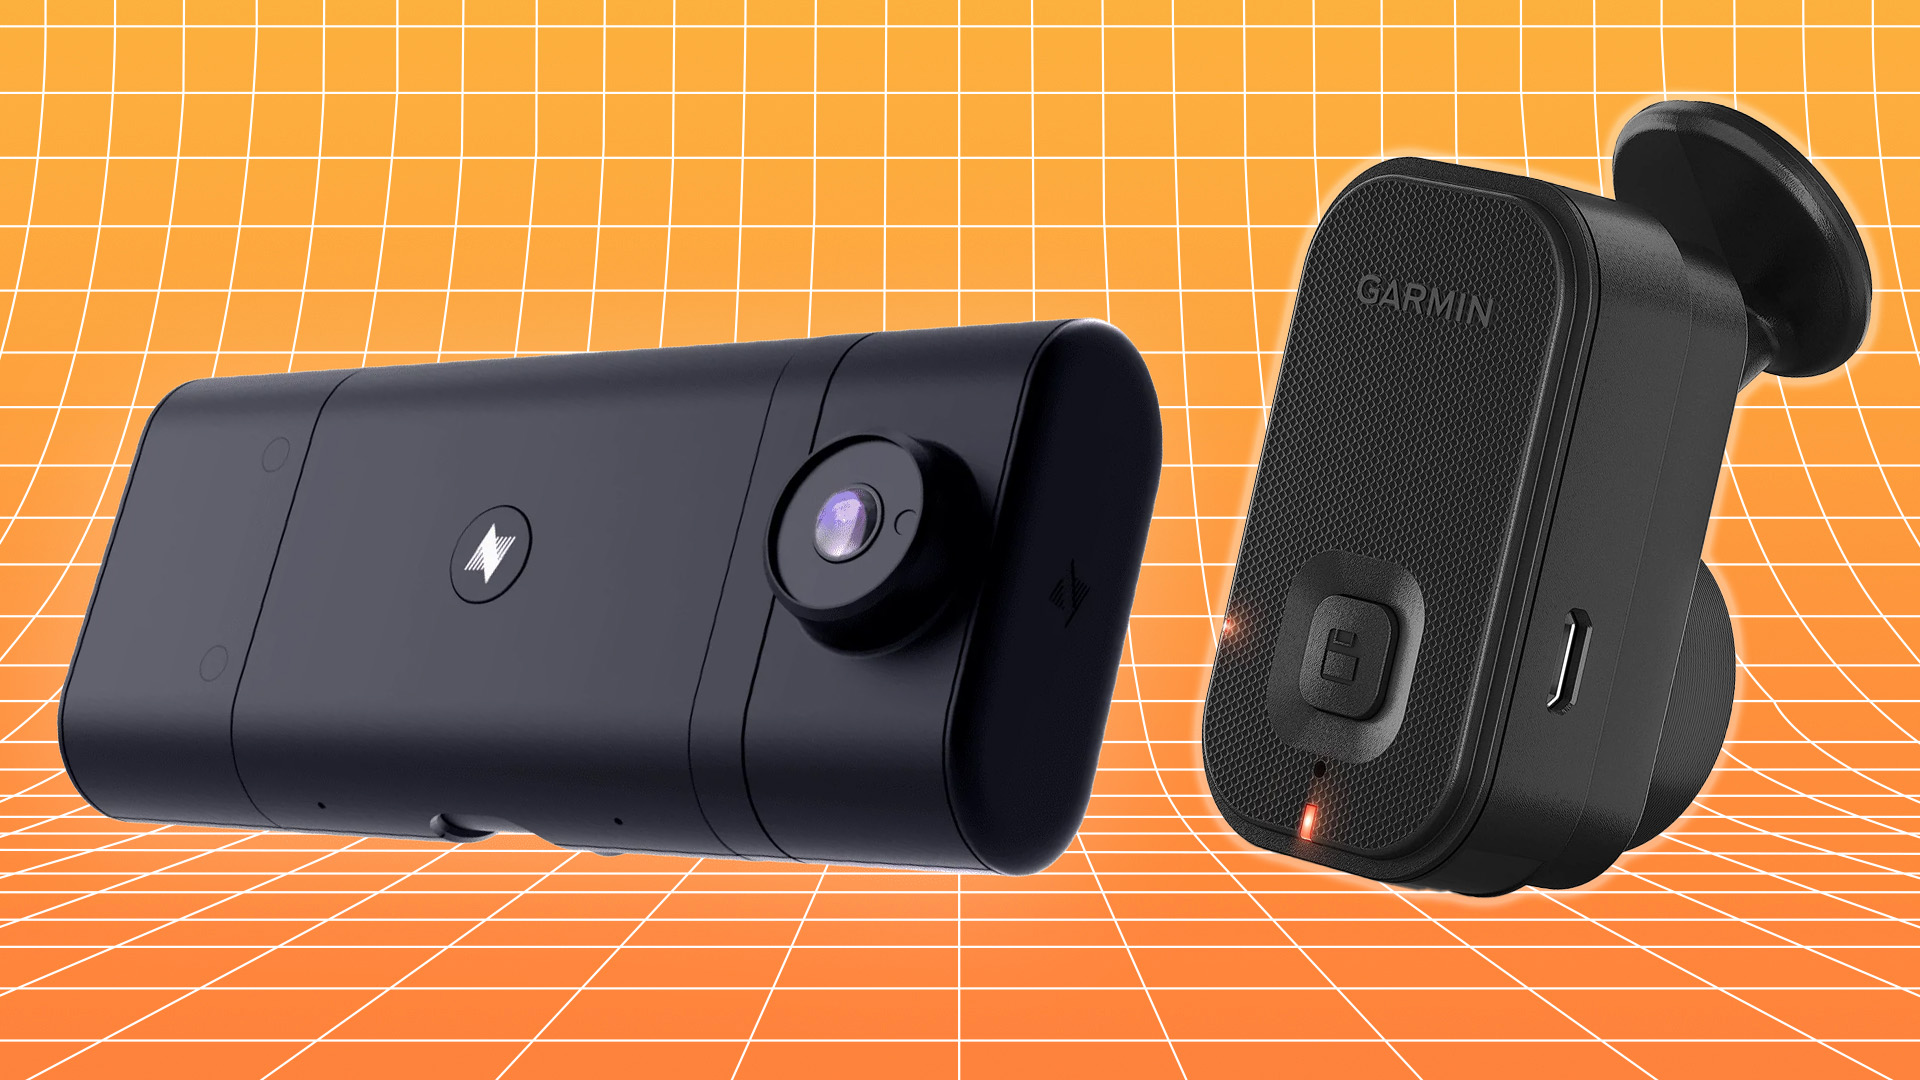 Big Holiday Discounts on the Dash Cams We’re Testing Right Now